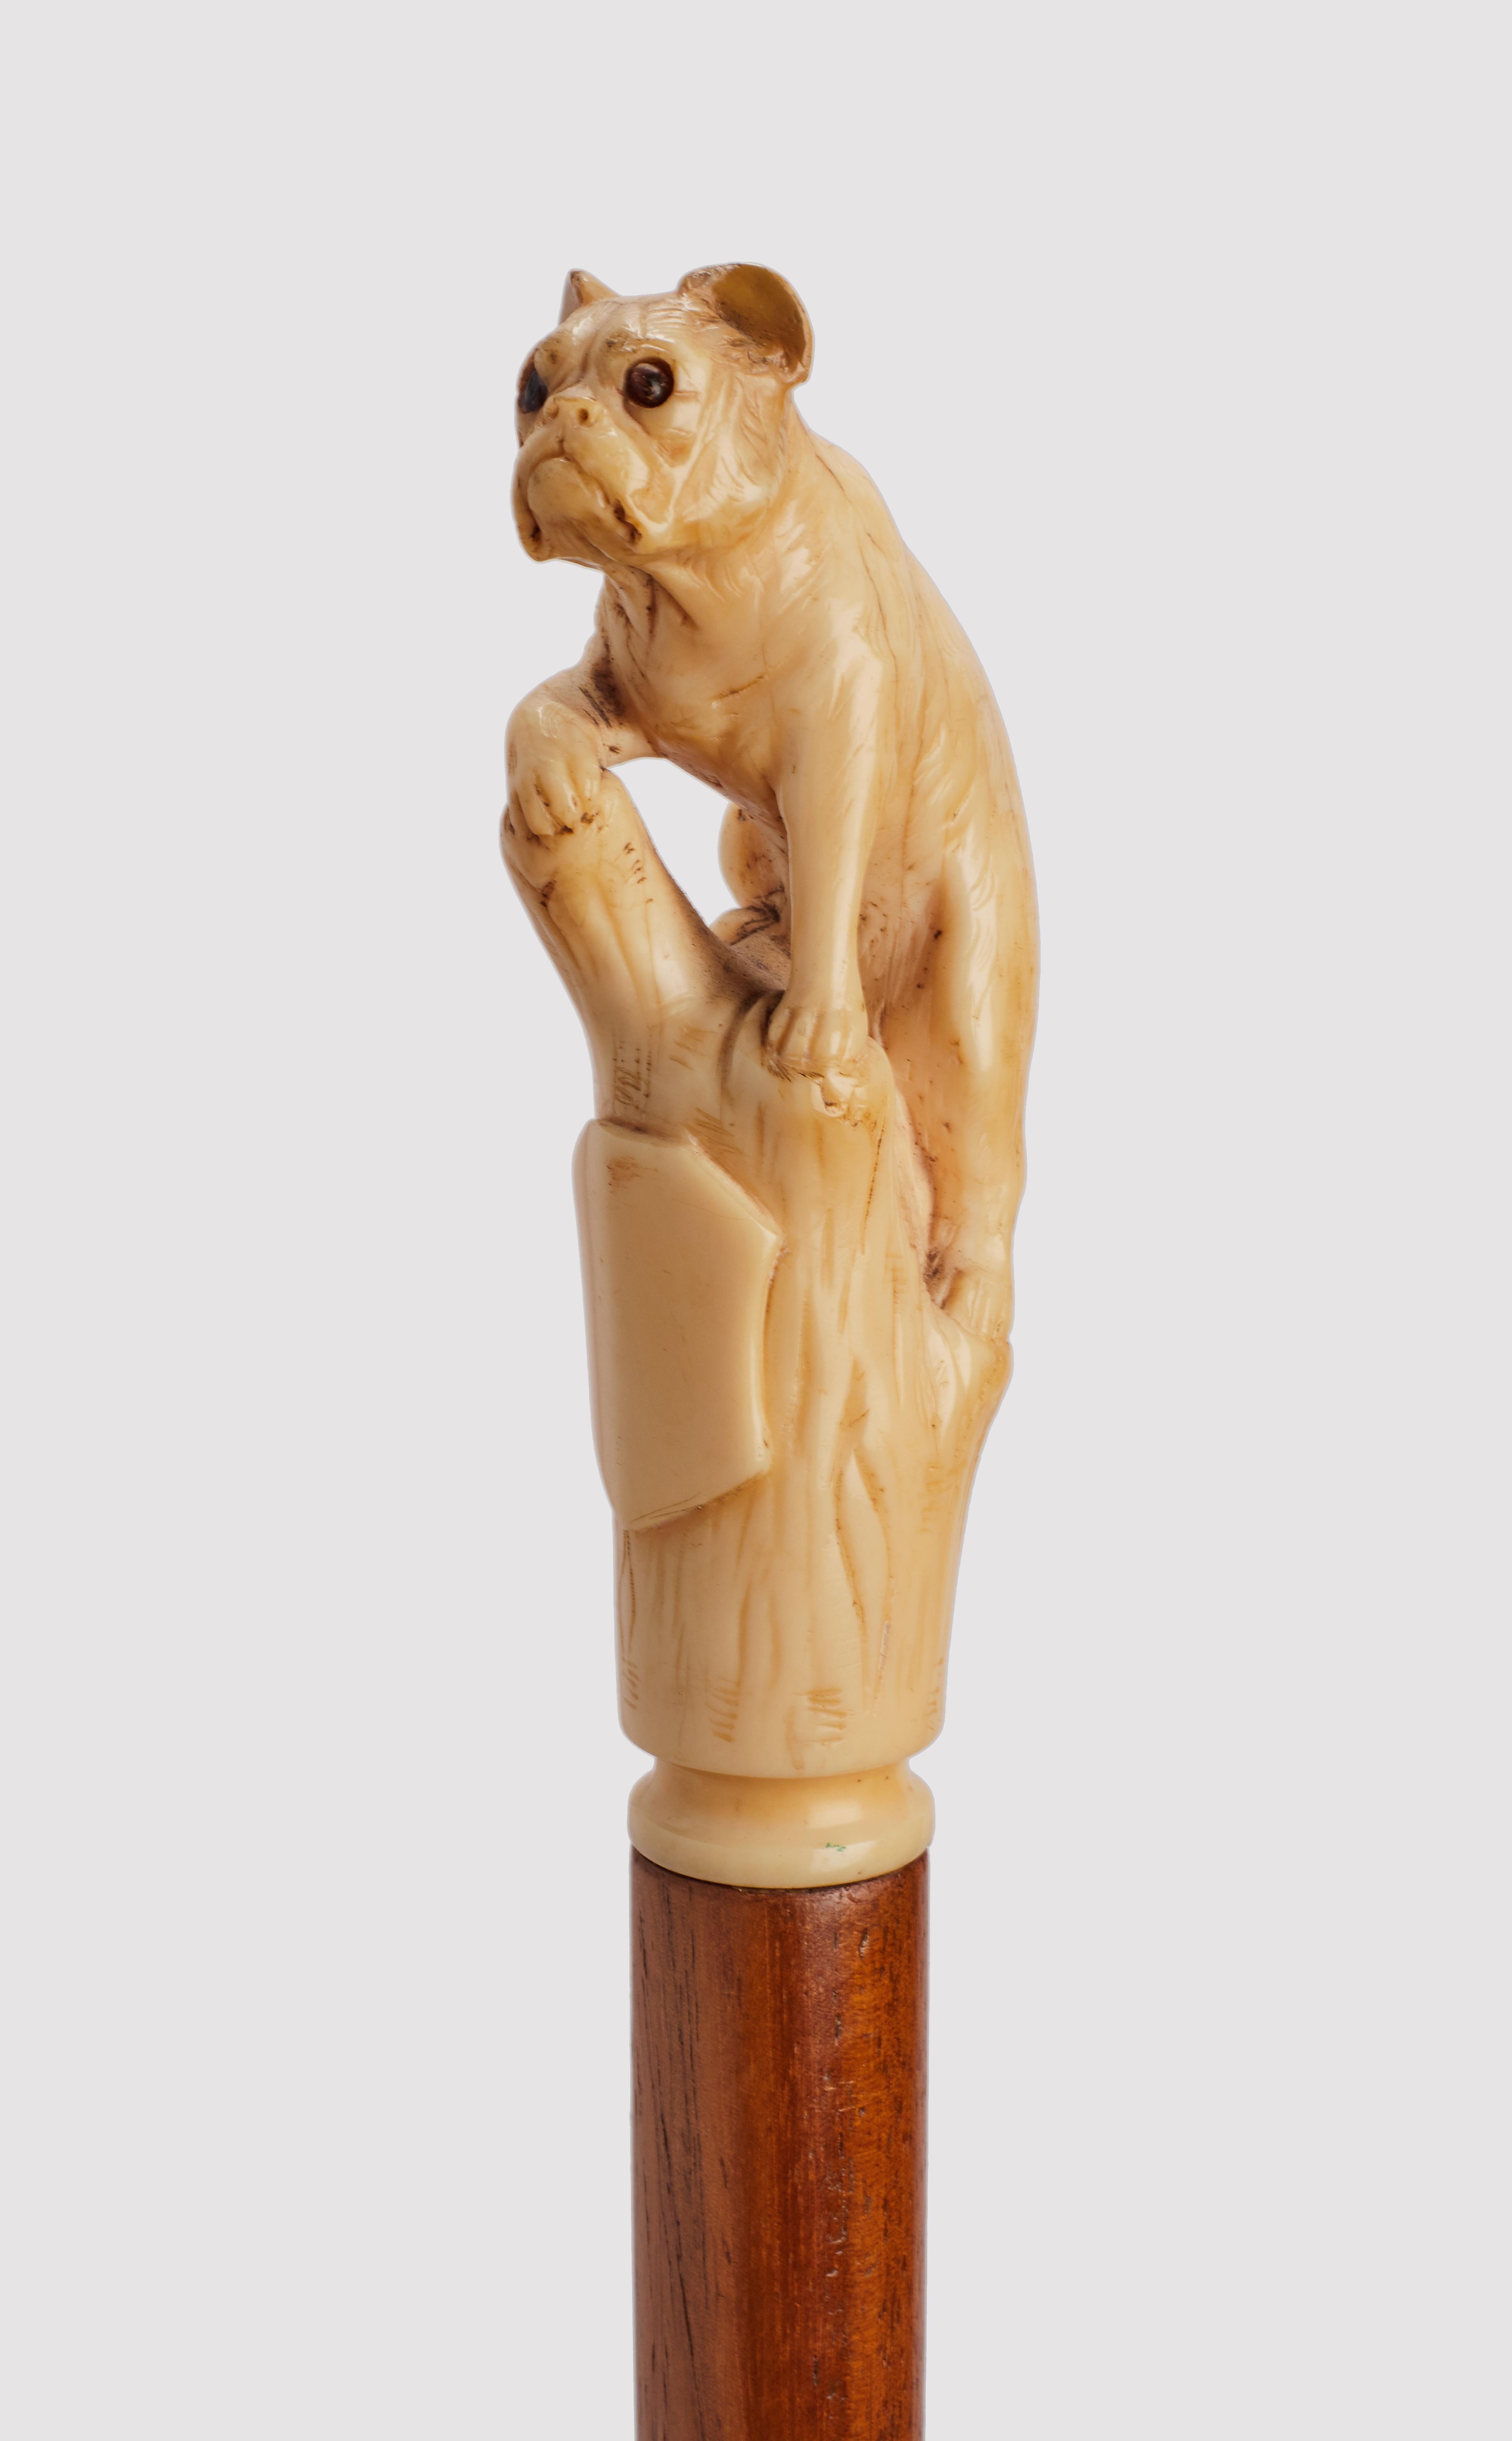 Walking stick: Ivory carved handle depicting a French bulldog sitting with a leg on a branch. Sulphur glass eyes. Malacca wood shaft. Metal ferule. France circa 1880. (SHIP TO EU ONLY)